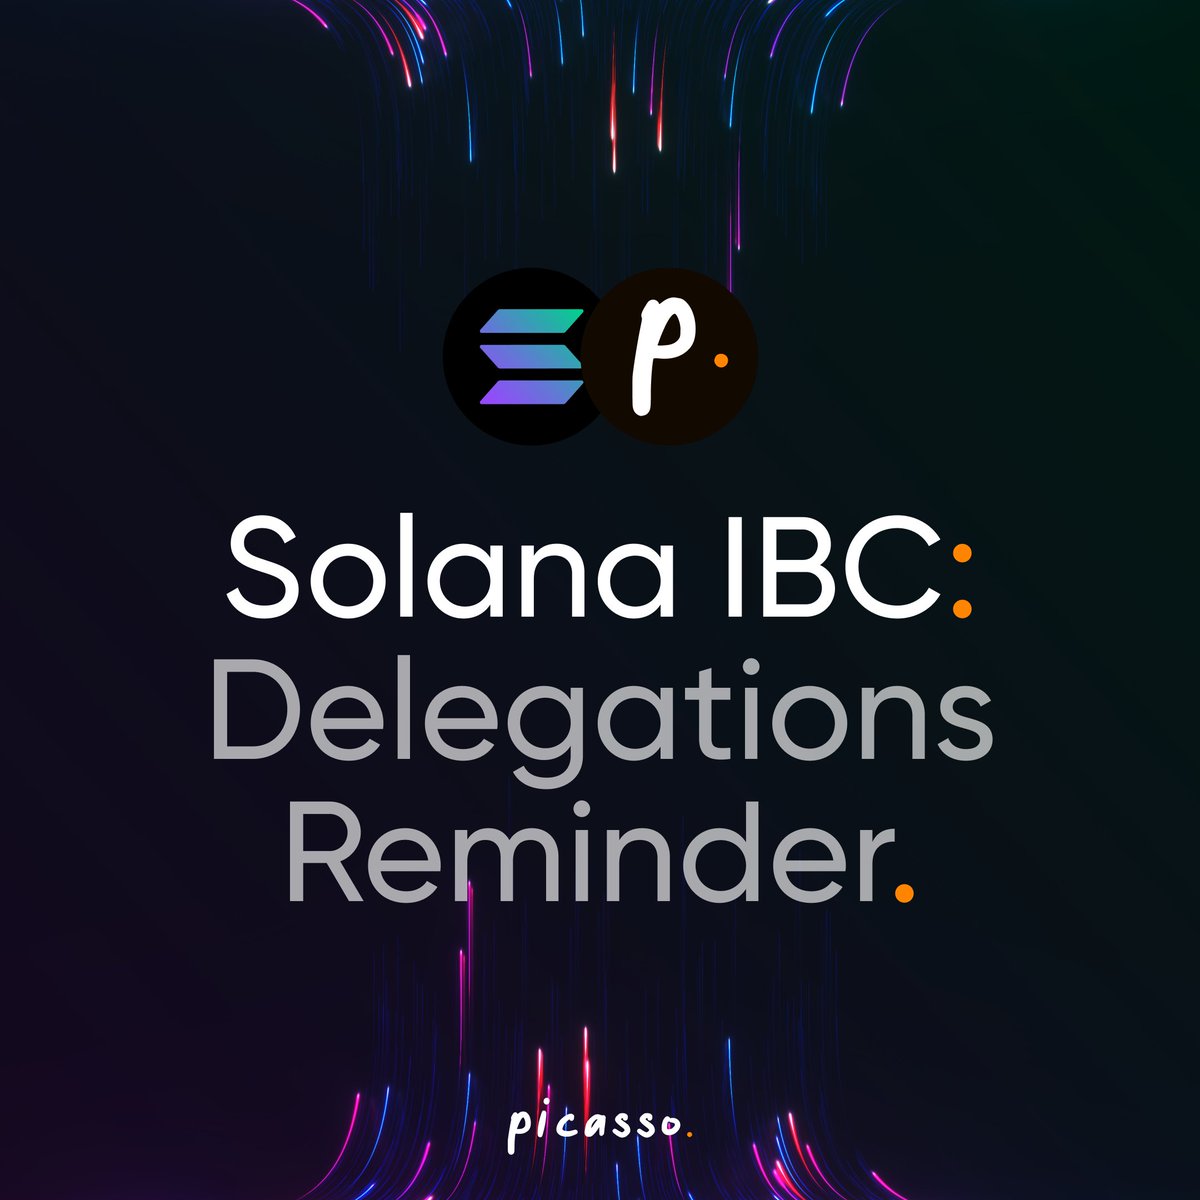 📣 Reminder: Please delegate your restaked SOL to operators of the Solana IBC AVS on mantis.app 💡Delegations are crucial for the next phase of the launch sequence for Solana IBC